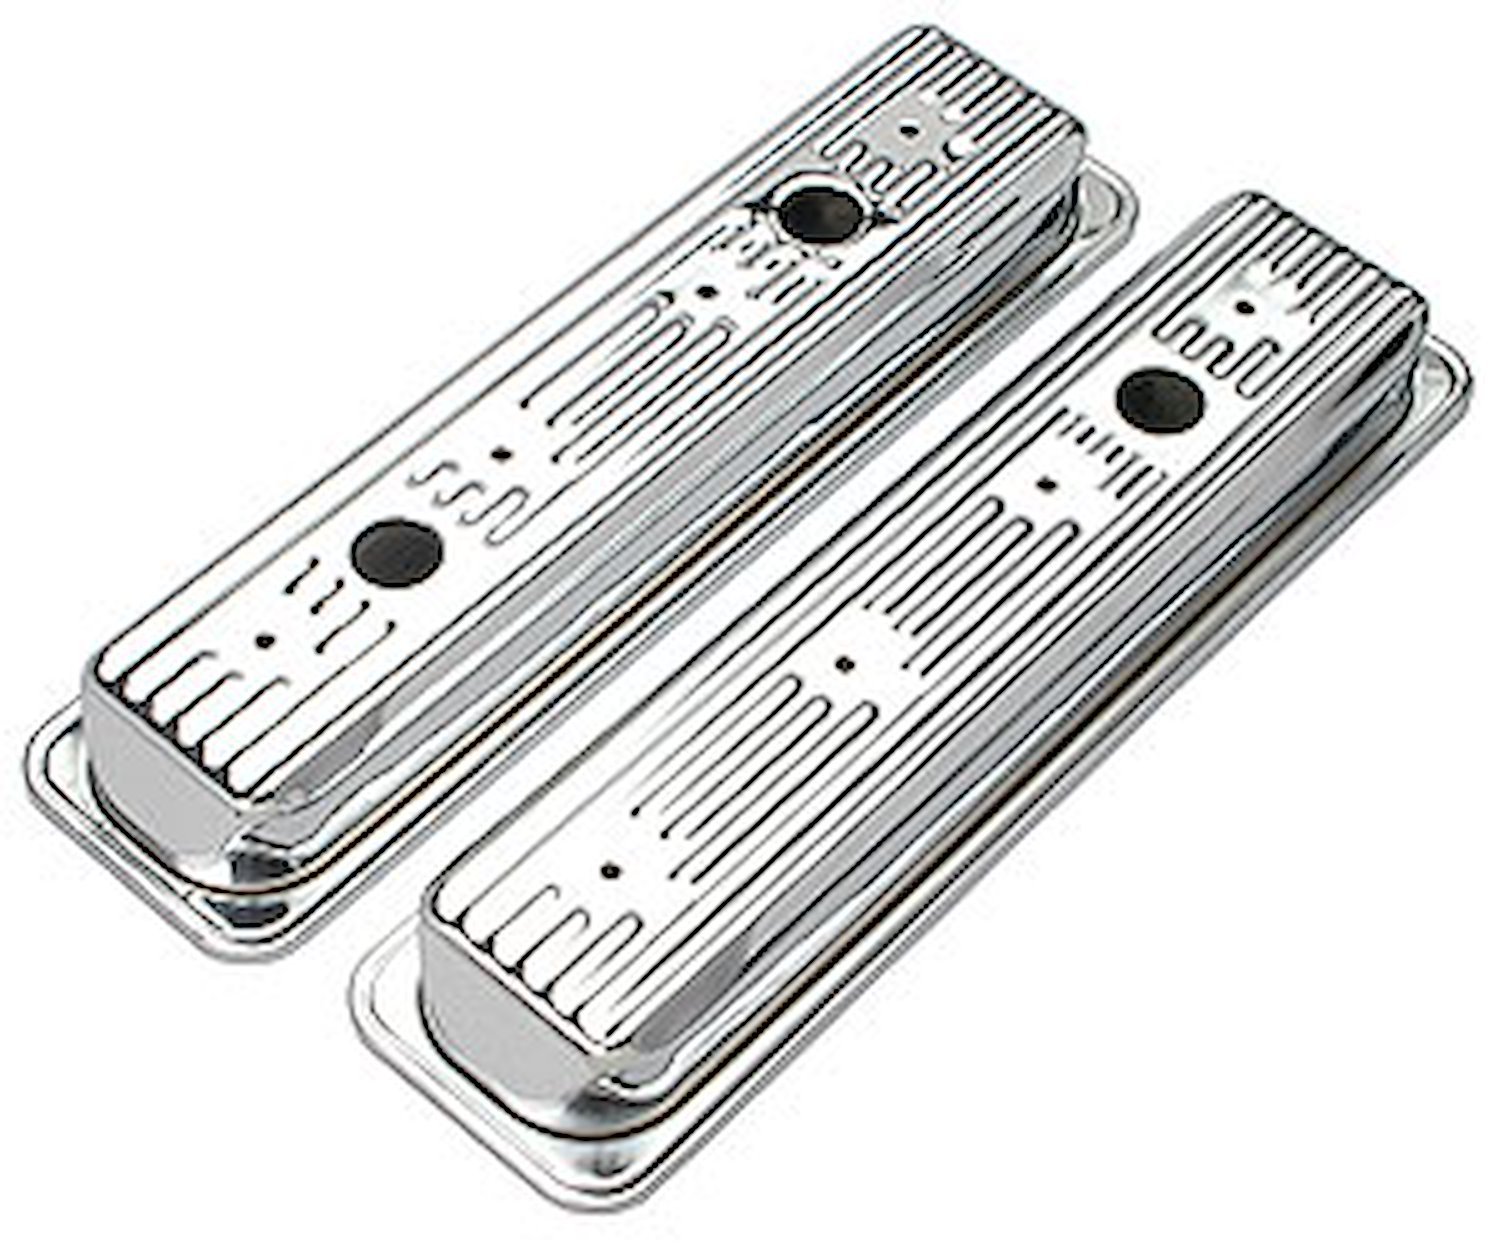 Chrome Plated Steel Valve Covers 1987-1999 Small Block Chevy 5.0L, 5.7L V8